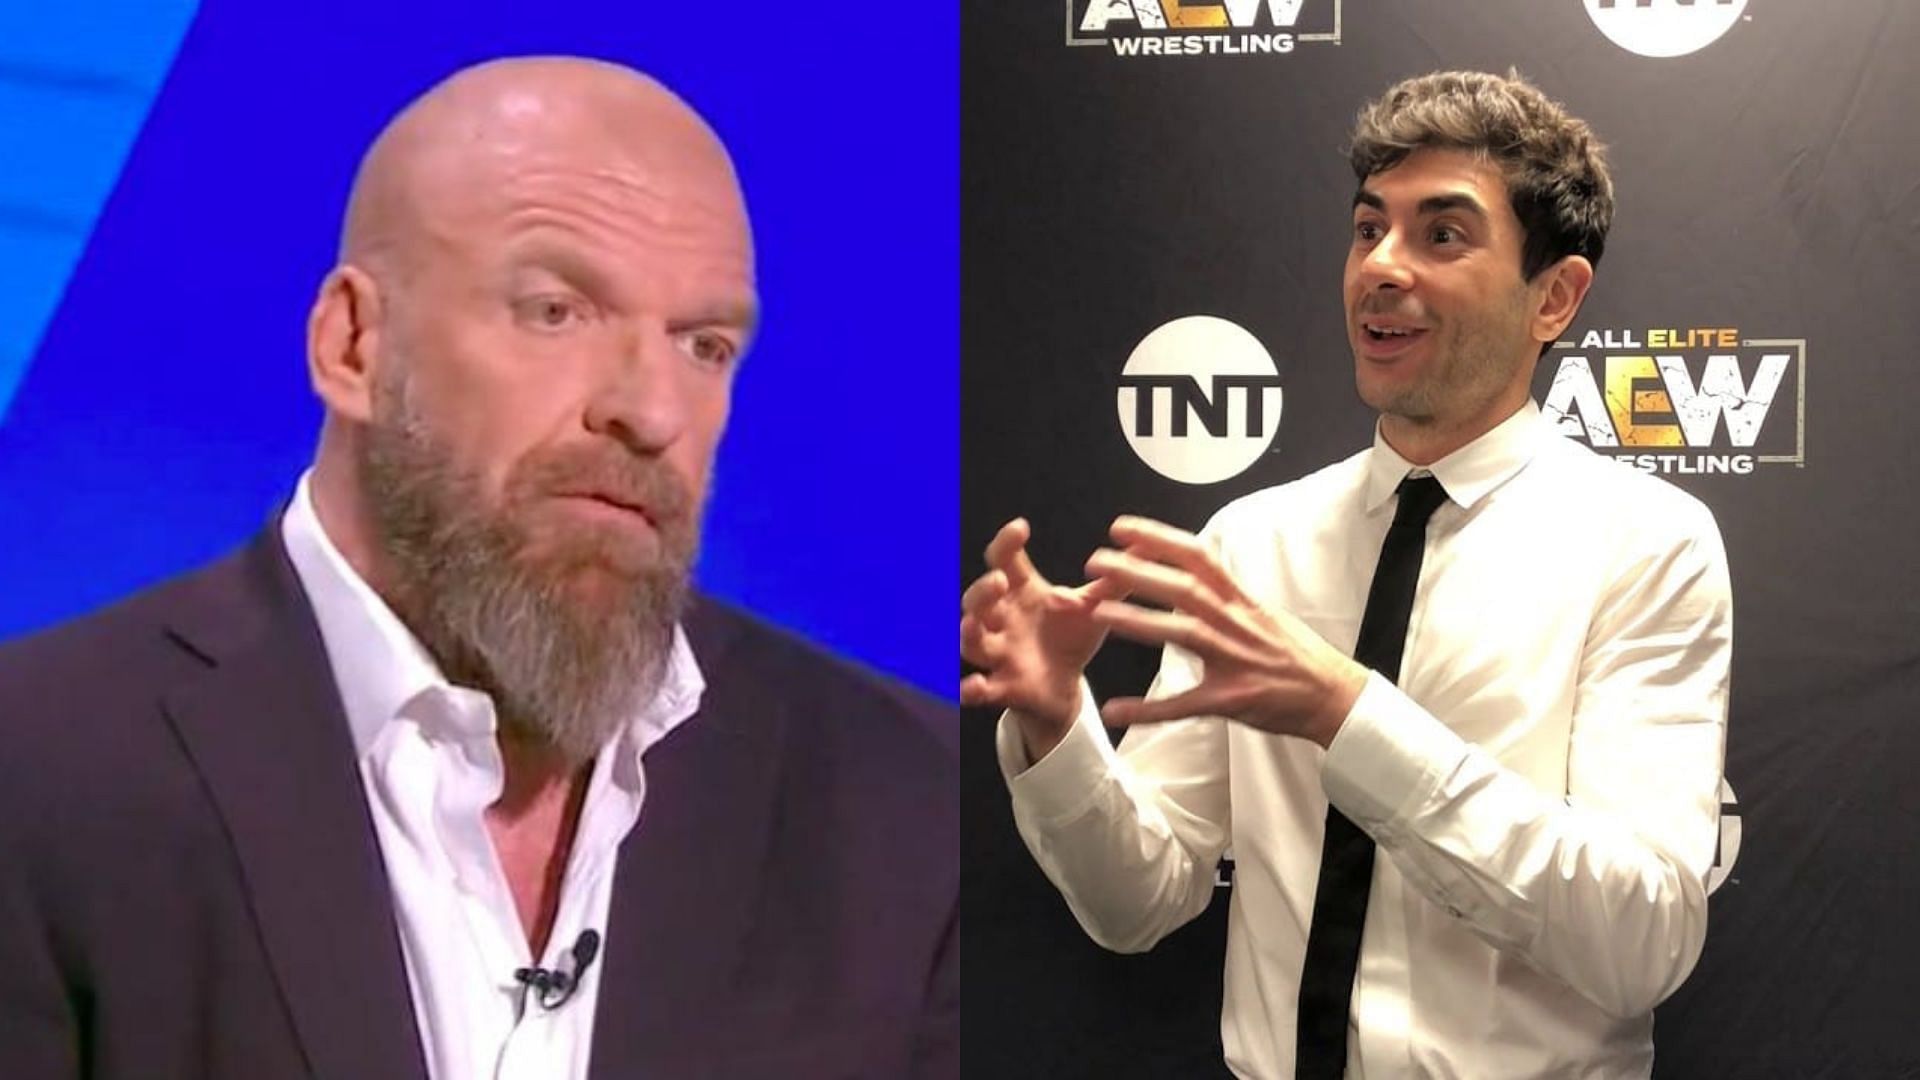 Triple H and Tony Khan are big names in WWE and AEW respectively